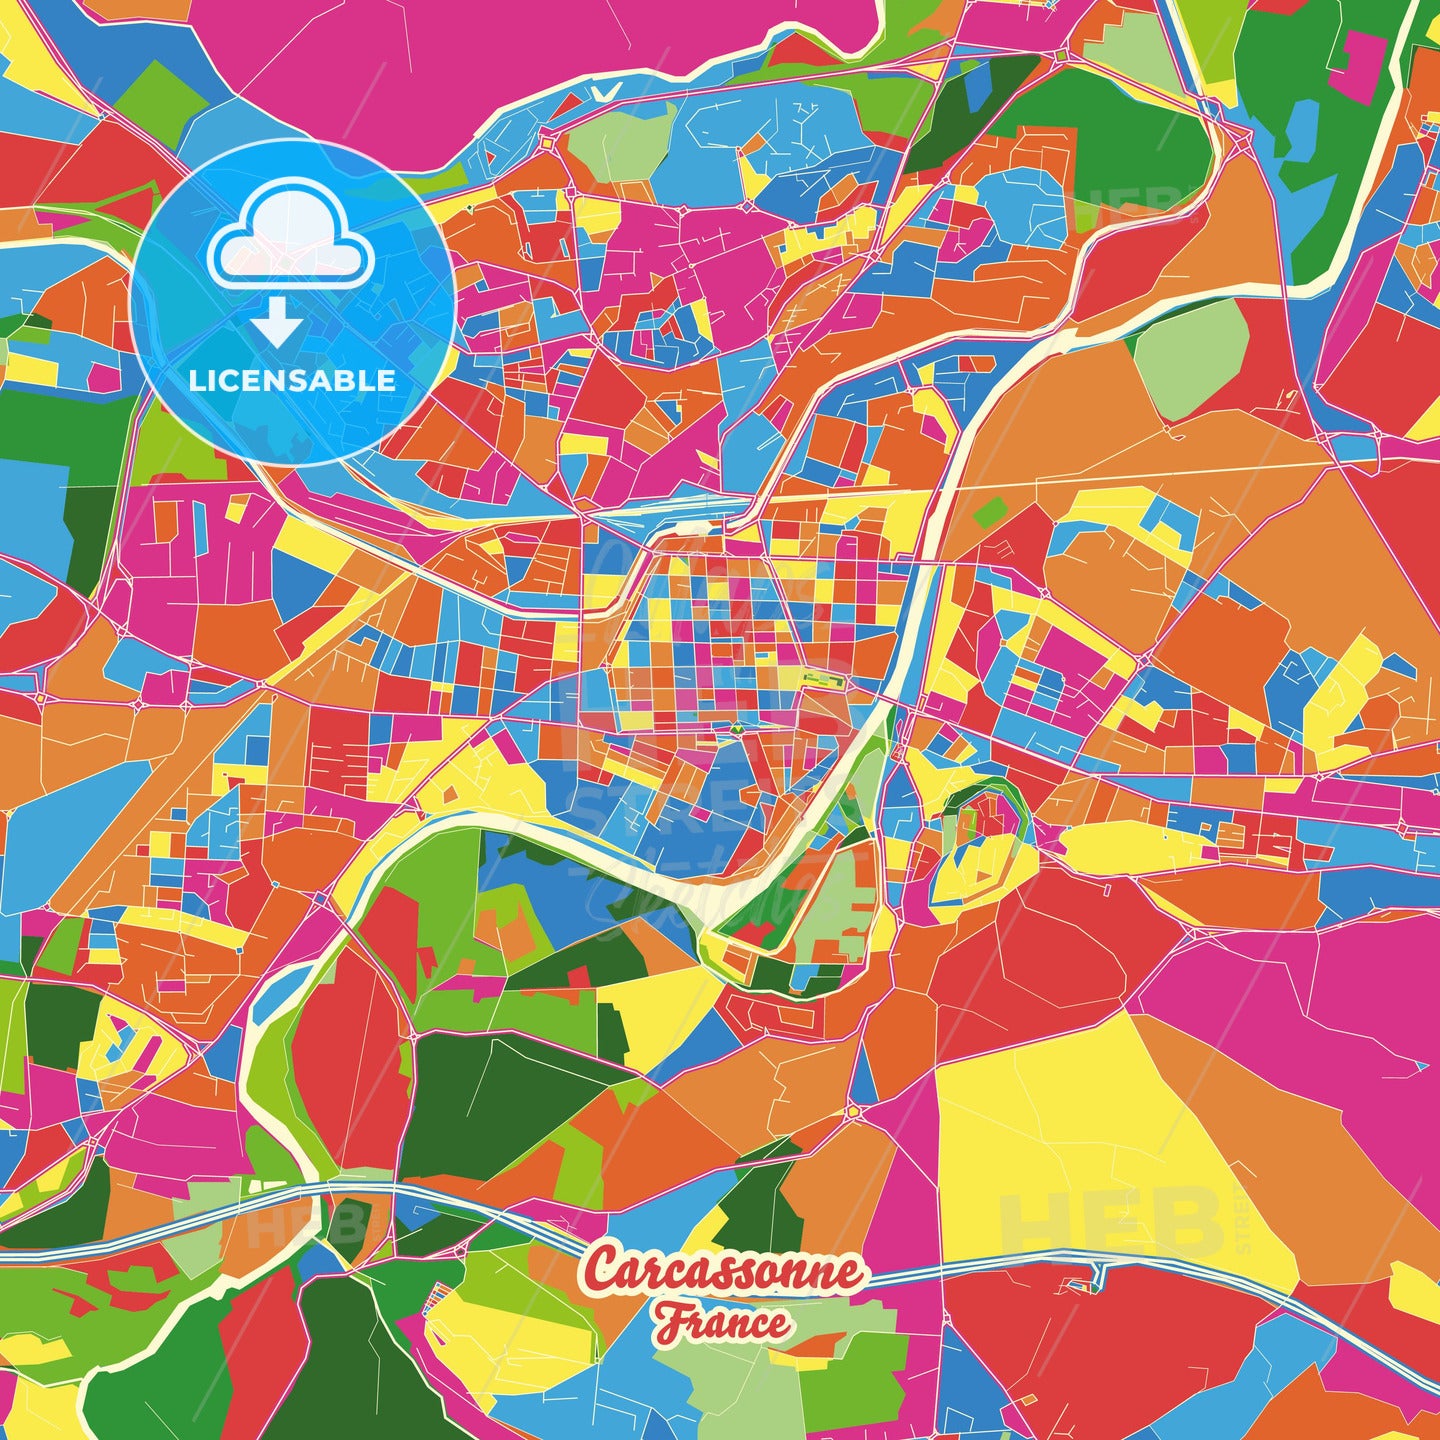 Carcassonne, France Crazy Colorful Street Map Poster Template - HEBSTREITS Sketches